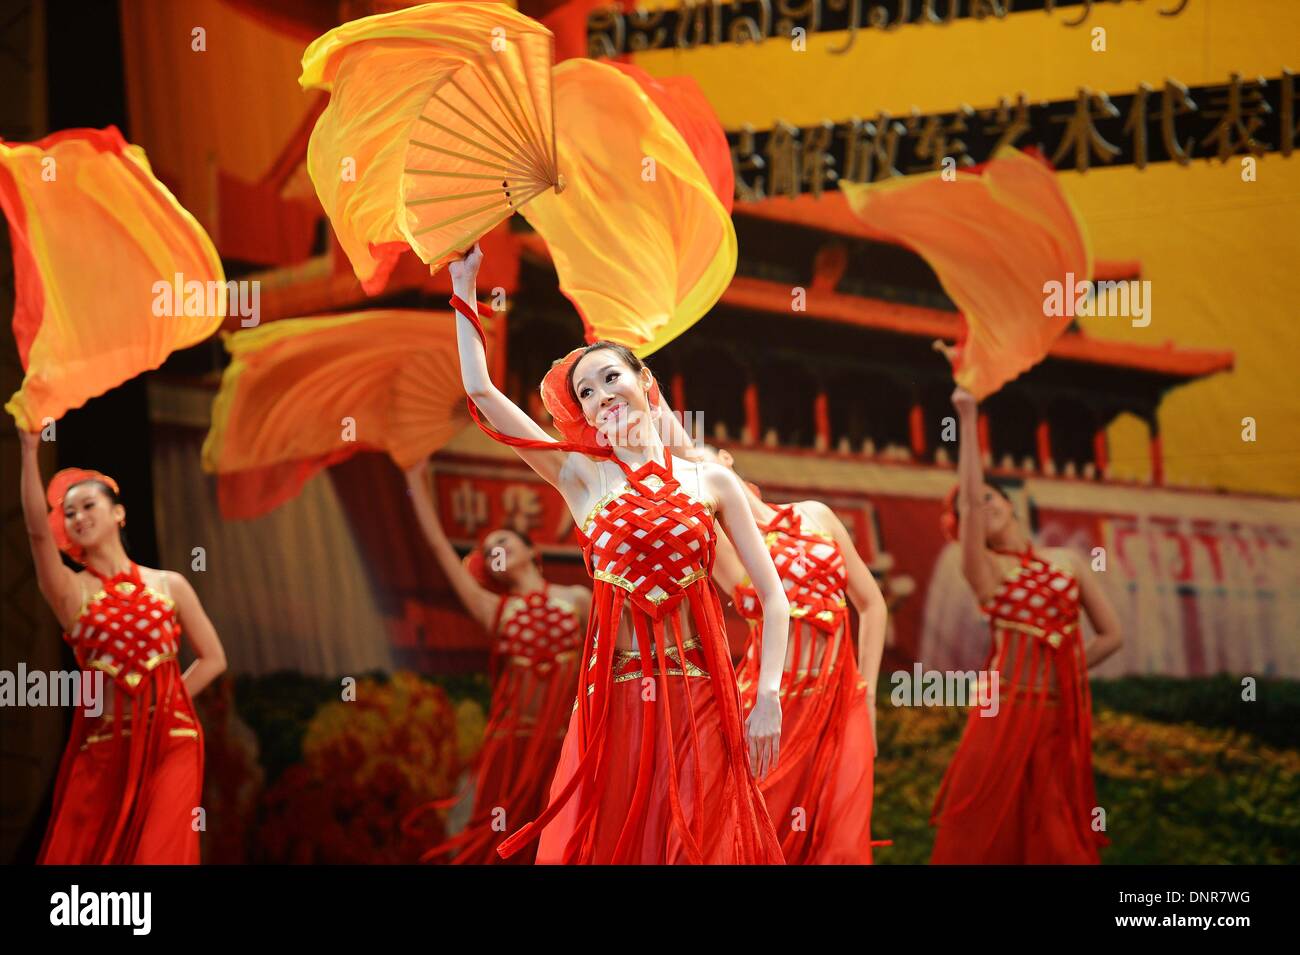 Vientiane, Laos. 4th Jan, 2014. Dancers of China's People's Liberation Army (PLA) Art Troupe perform in Vientiane, capital of Laos, on Jan. 4, 2014. Credit:  Liu Ailun/Xinhua/Alamy Live News Stock Photo